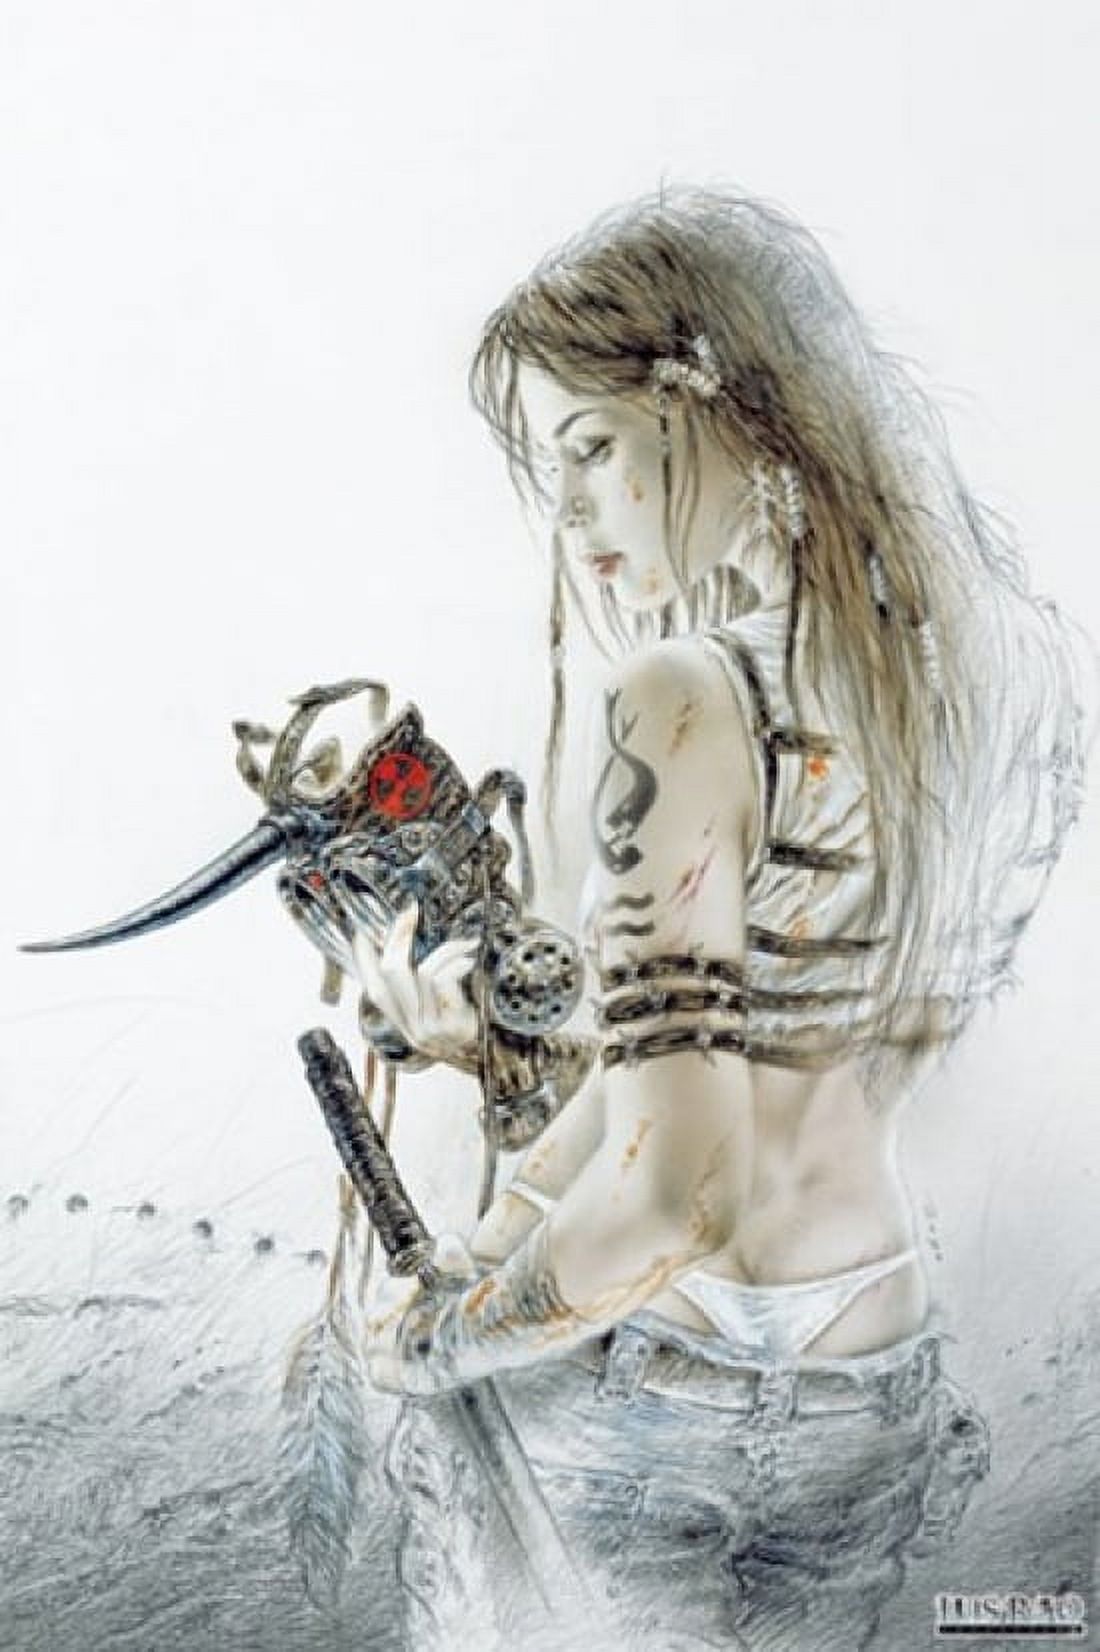 Sketch Poster by Luis Royo (24 x 36) - image 1 of 1